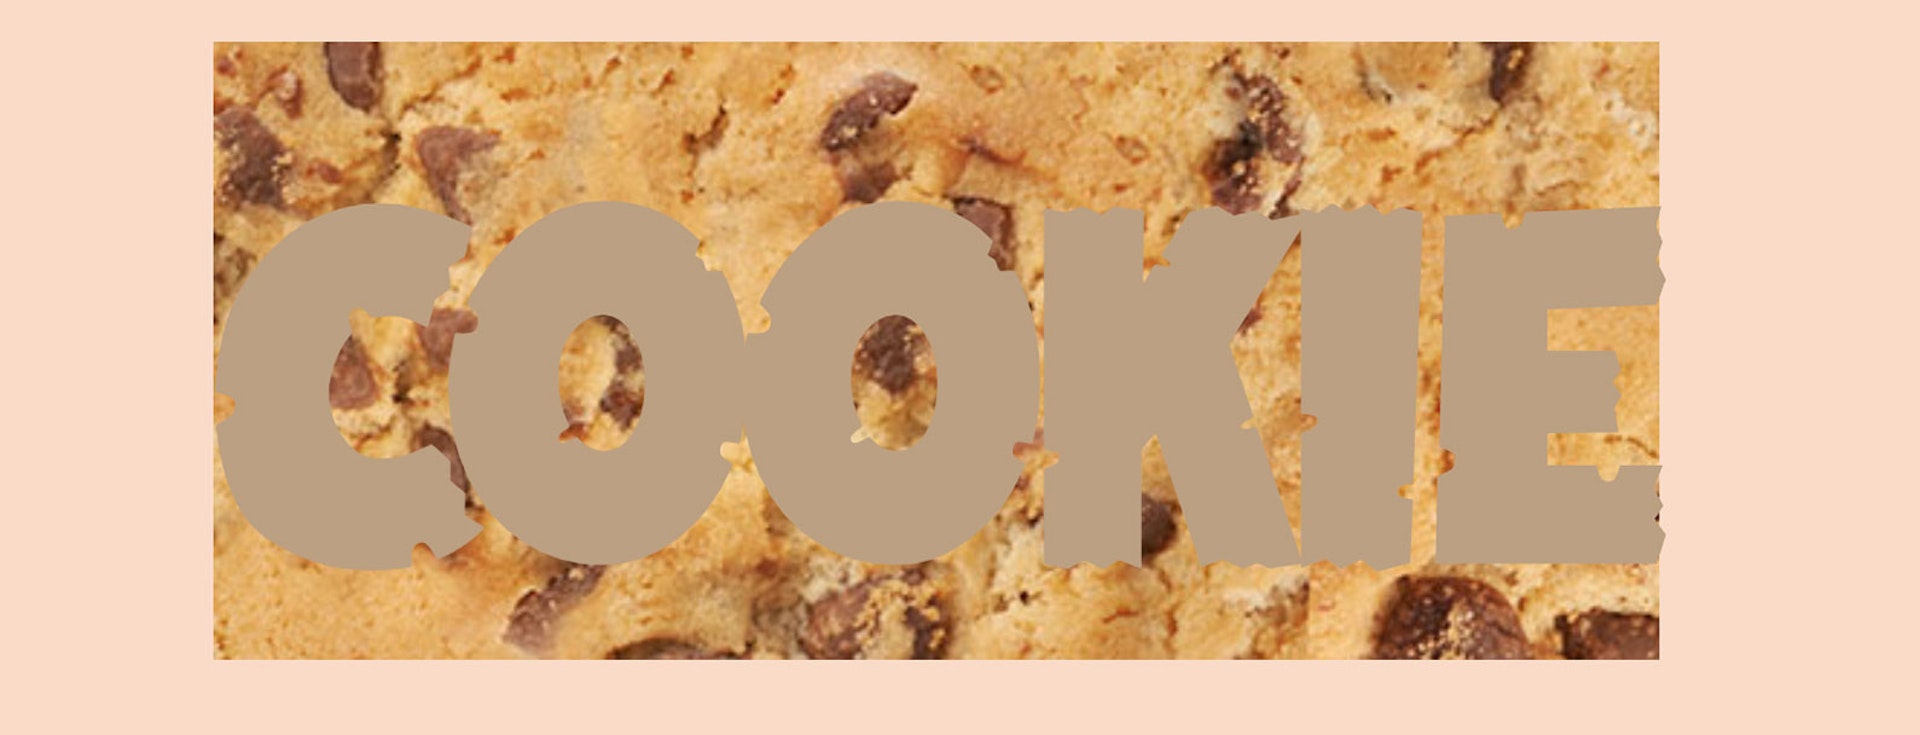 Cookie text with a cookie texture background unclipped to text